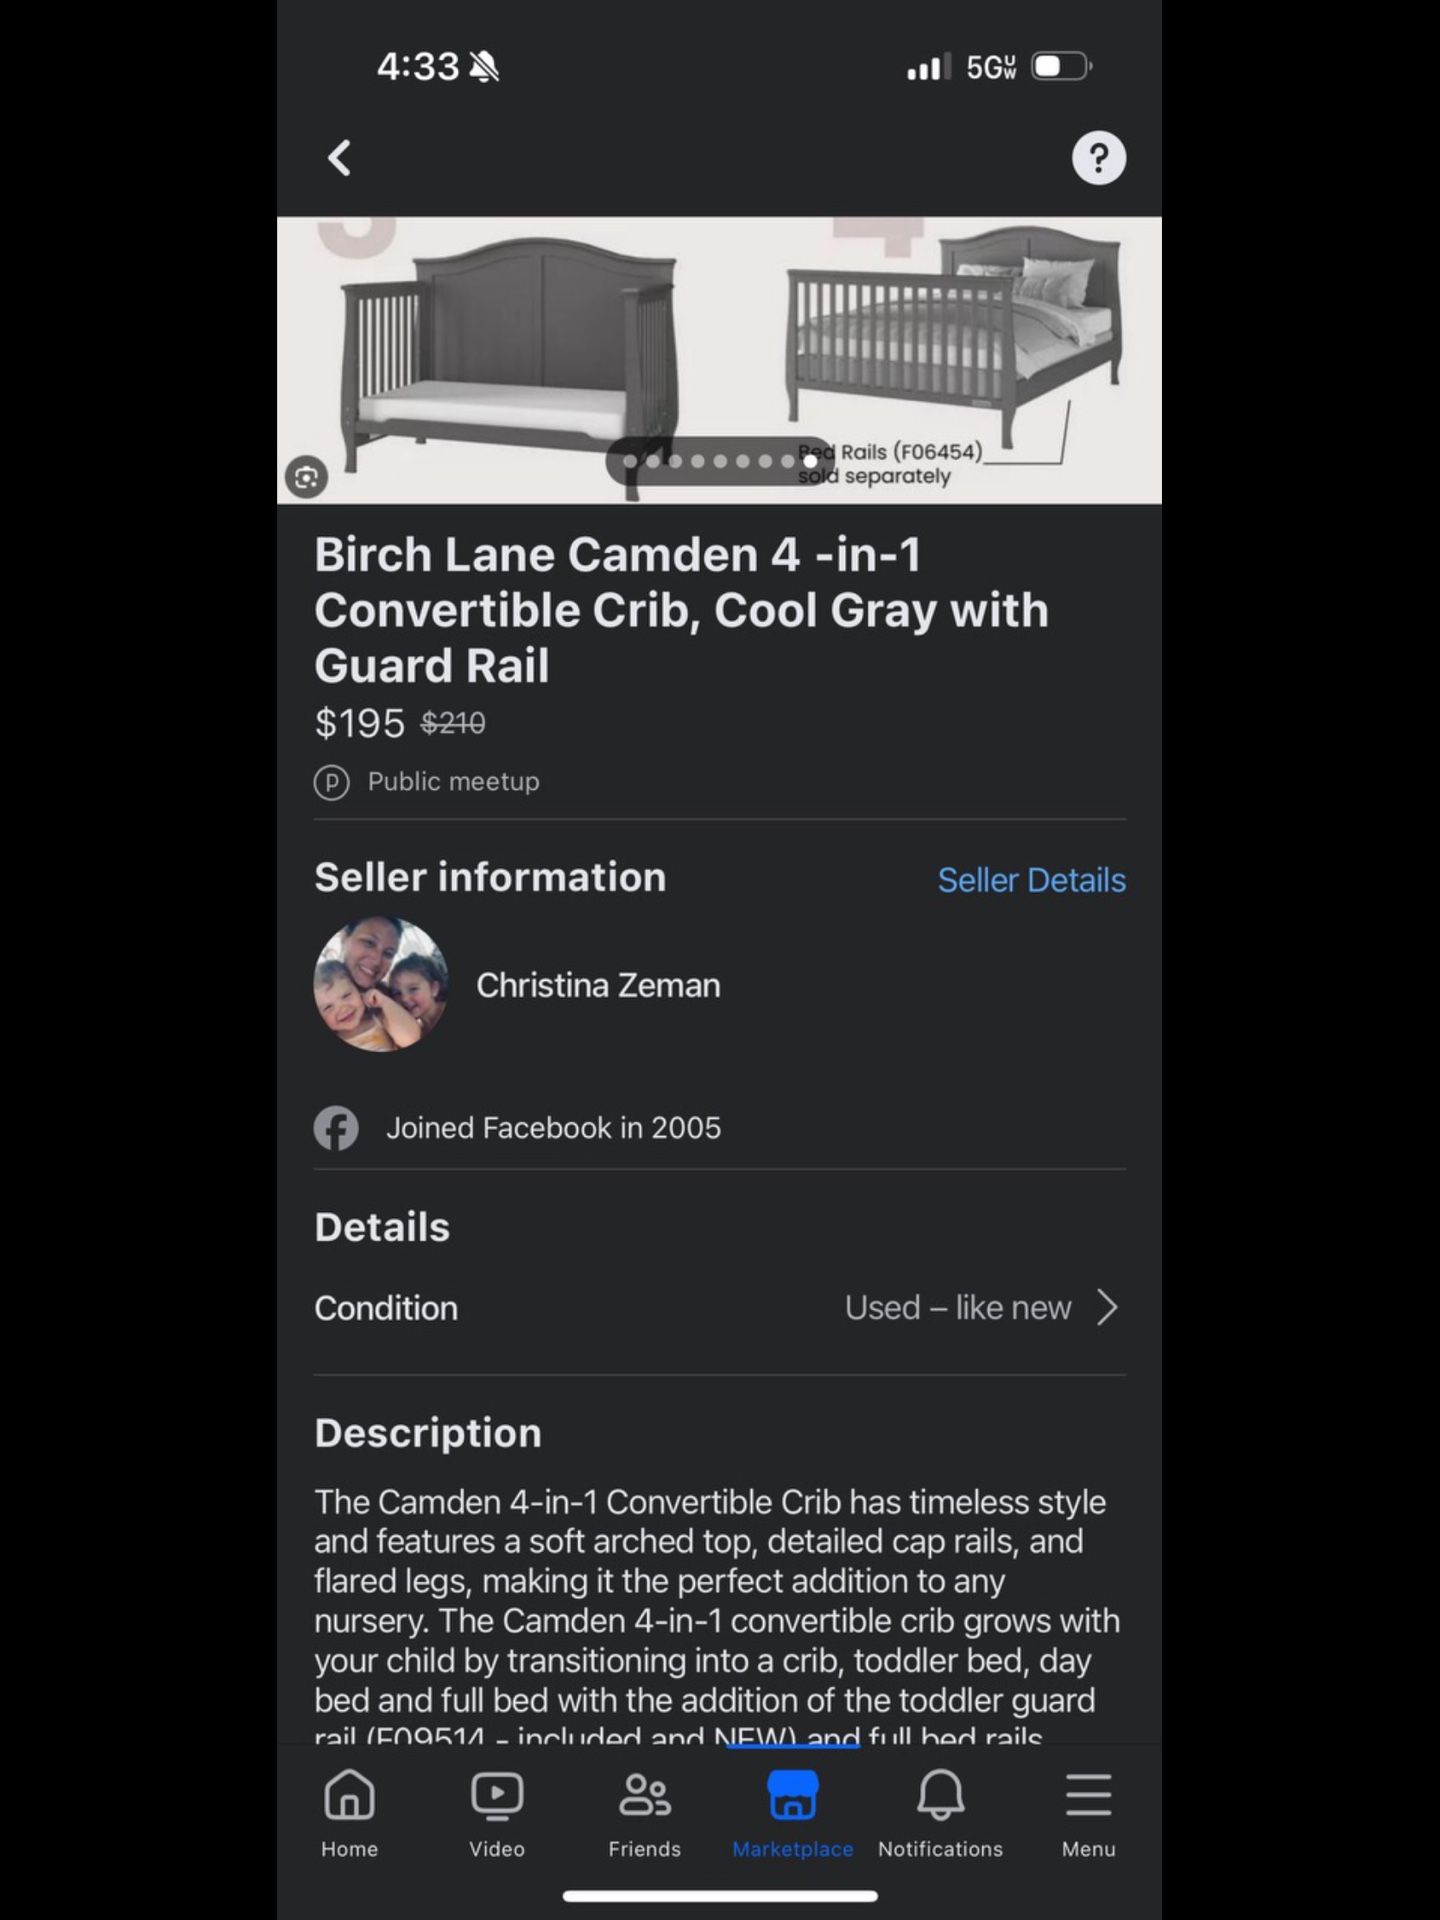 Birch Lane Camden 4-in-1 Crib, Cool Gray With Guard Rail Excellent Condition 